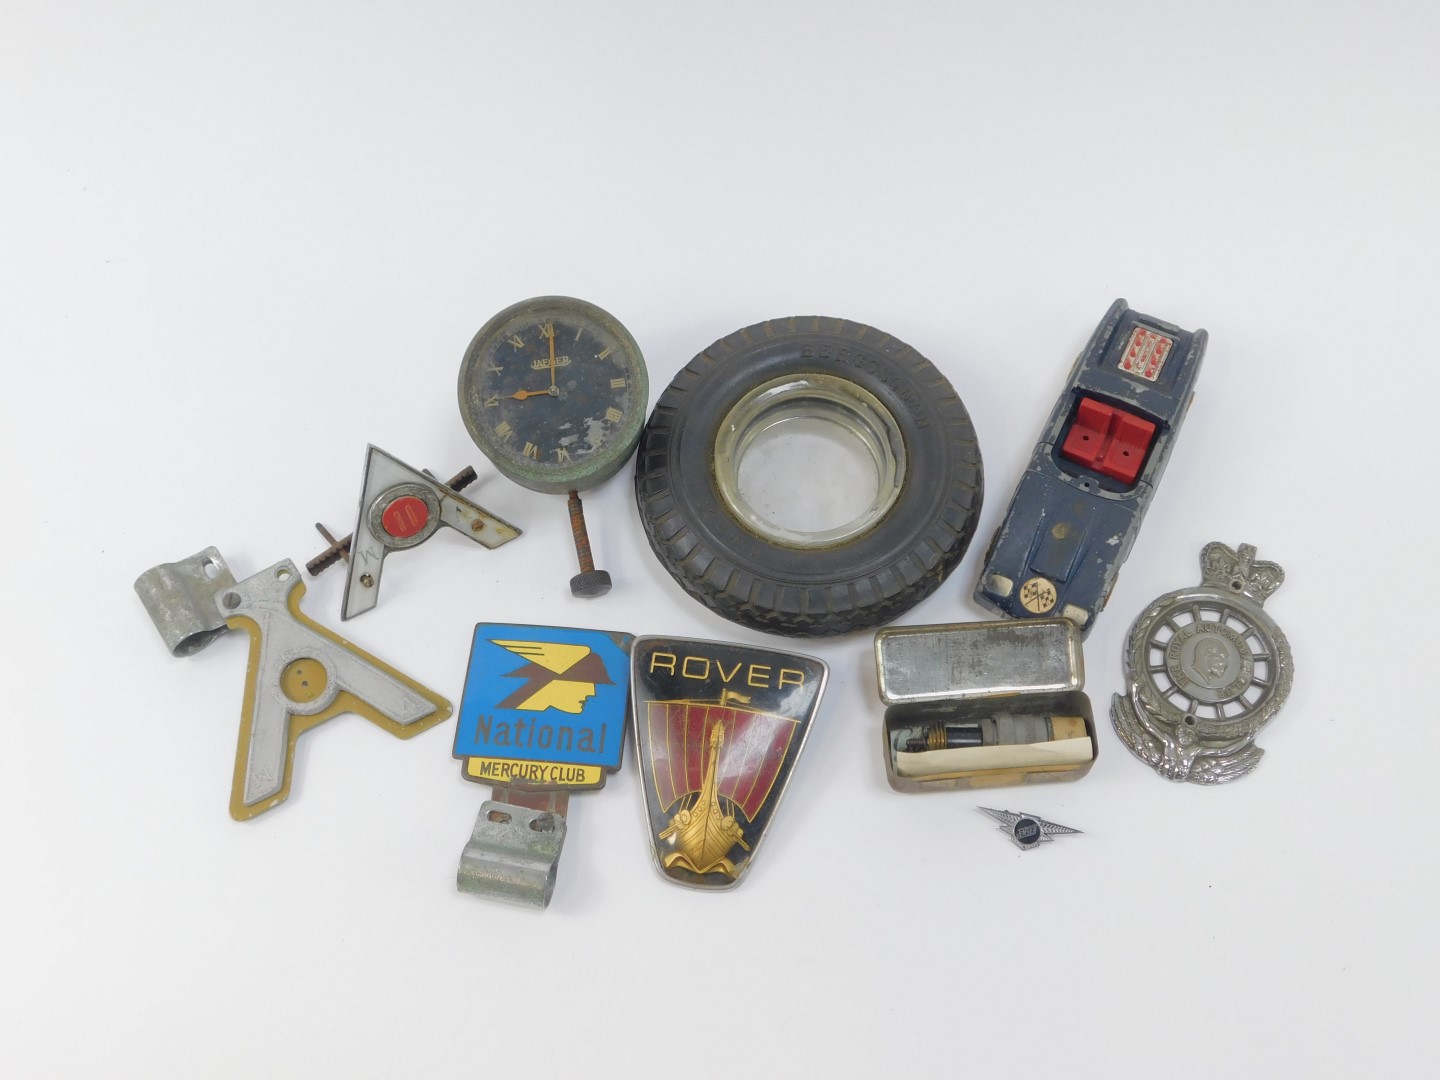 Various car badges, to include Rover, National Mercury Club, VM Driver, Royal Automobile Club, VM, R - Image 2 of 3